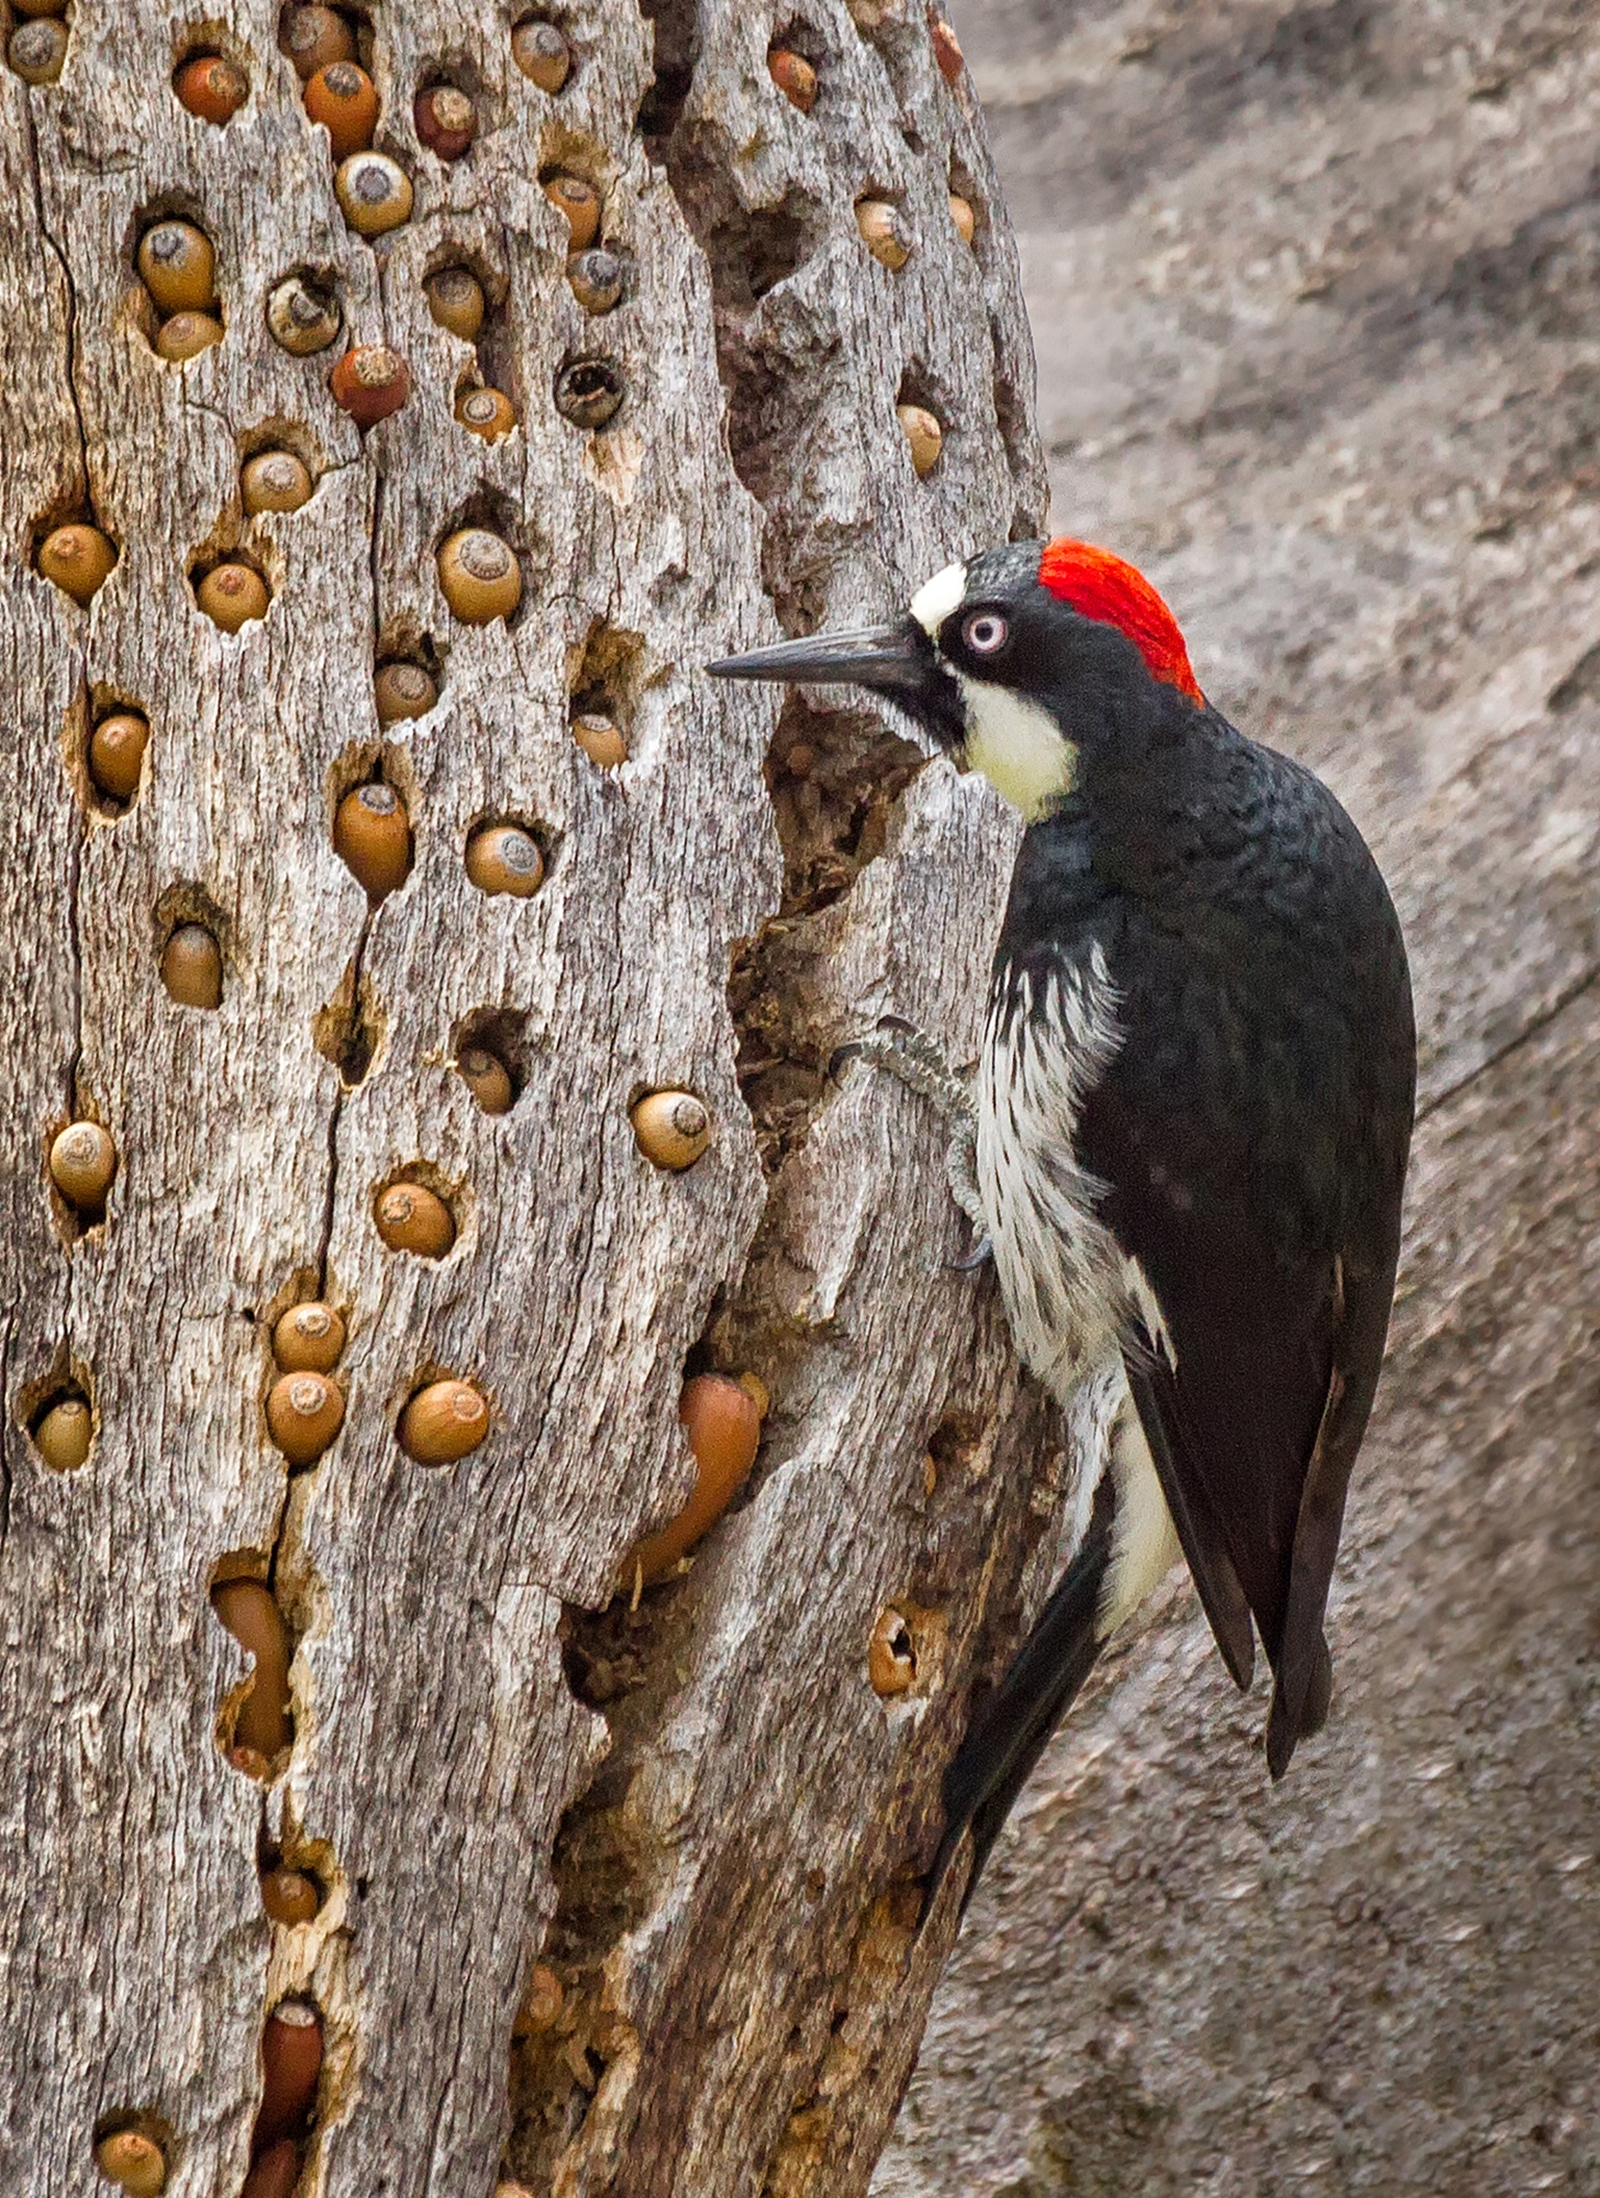 Do Some Woodpeckers Store Acorns in Specialized Tree Holes?